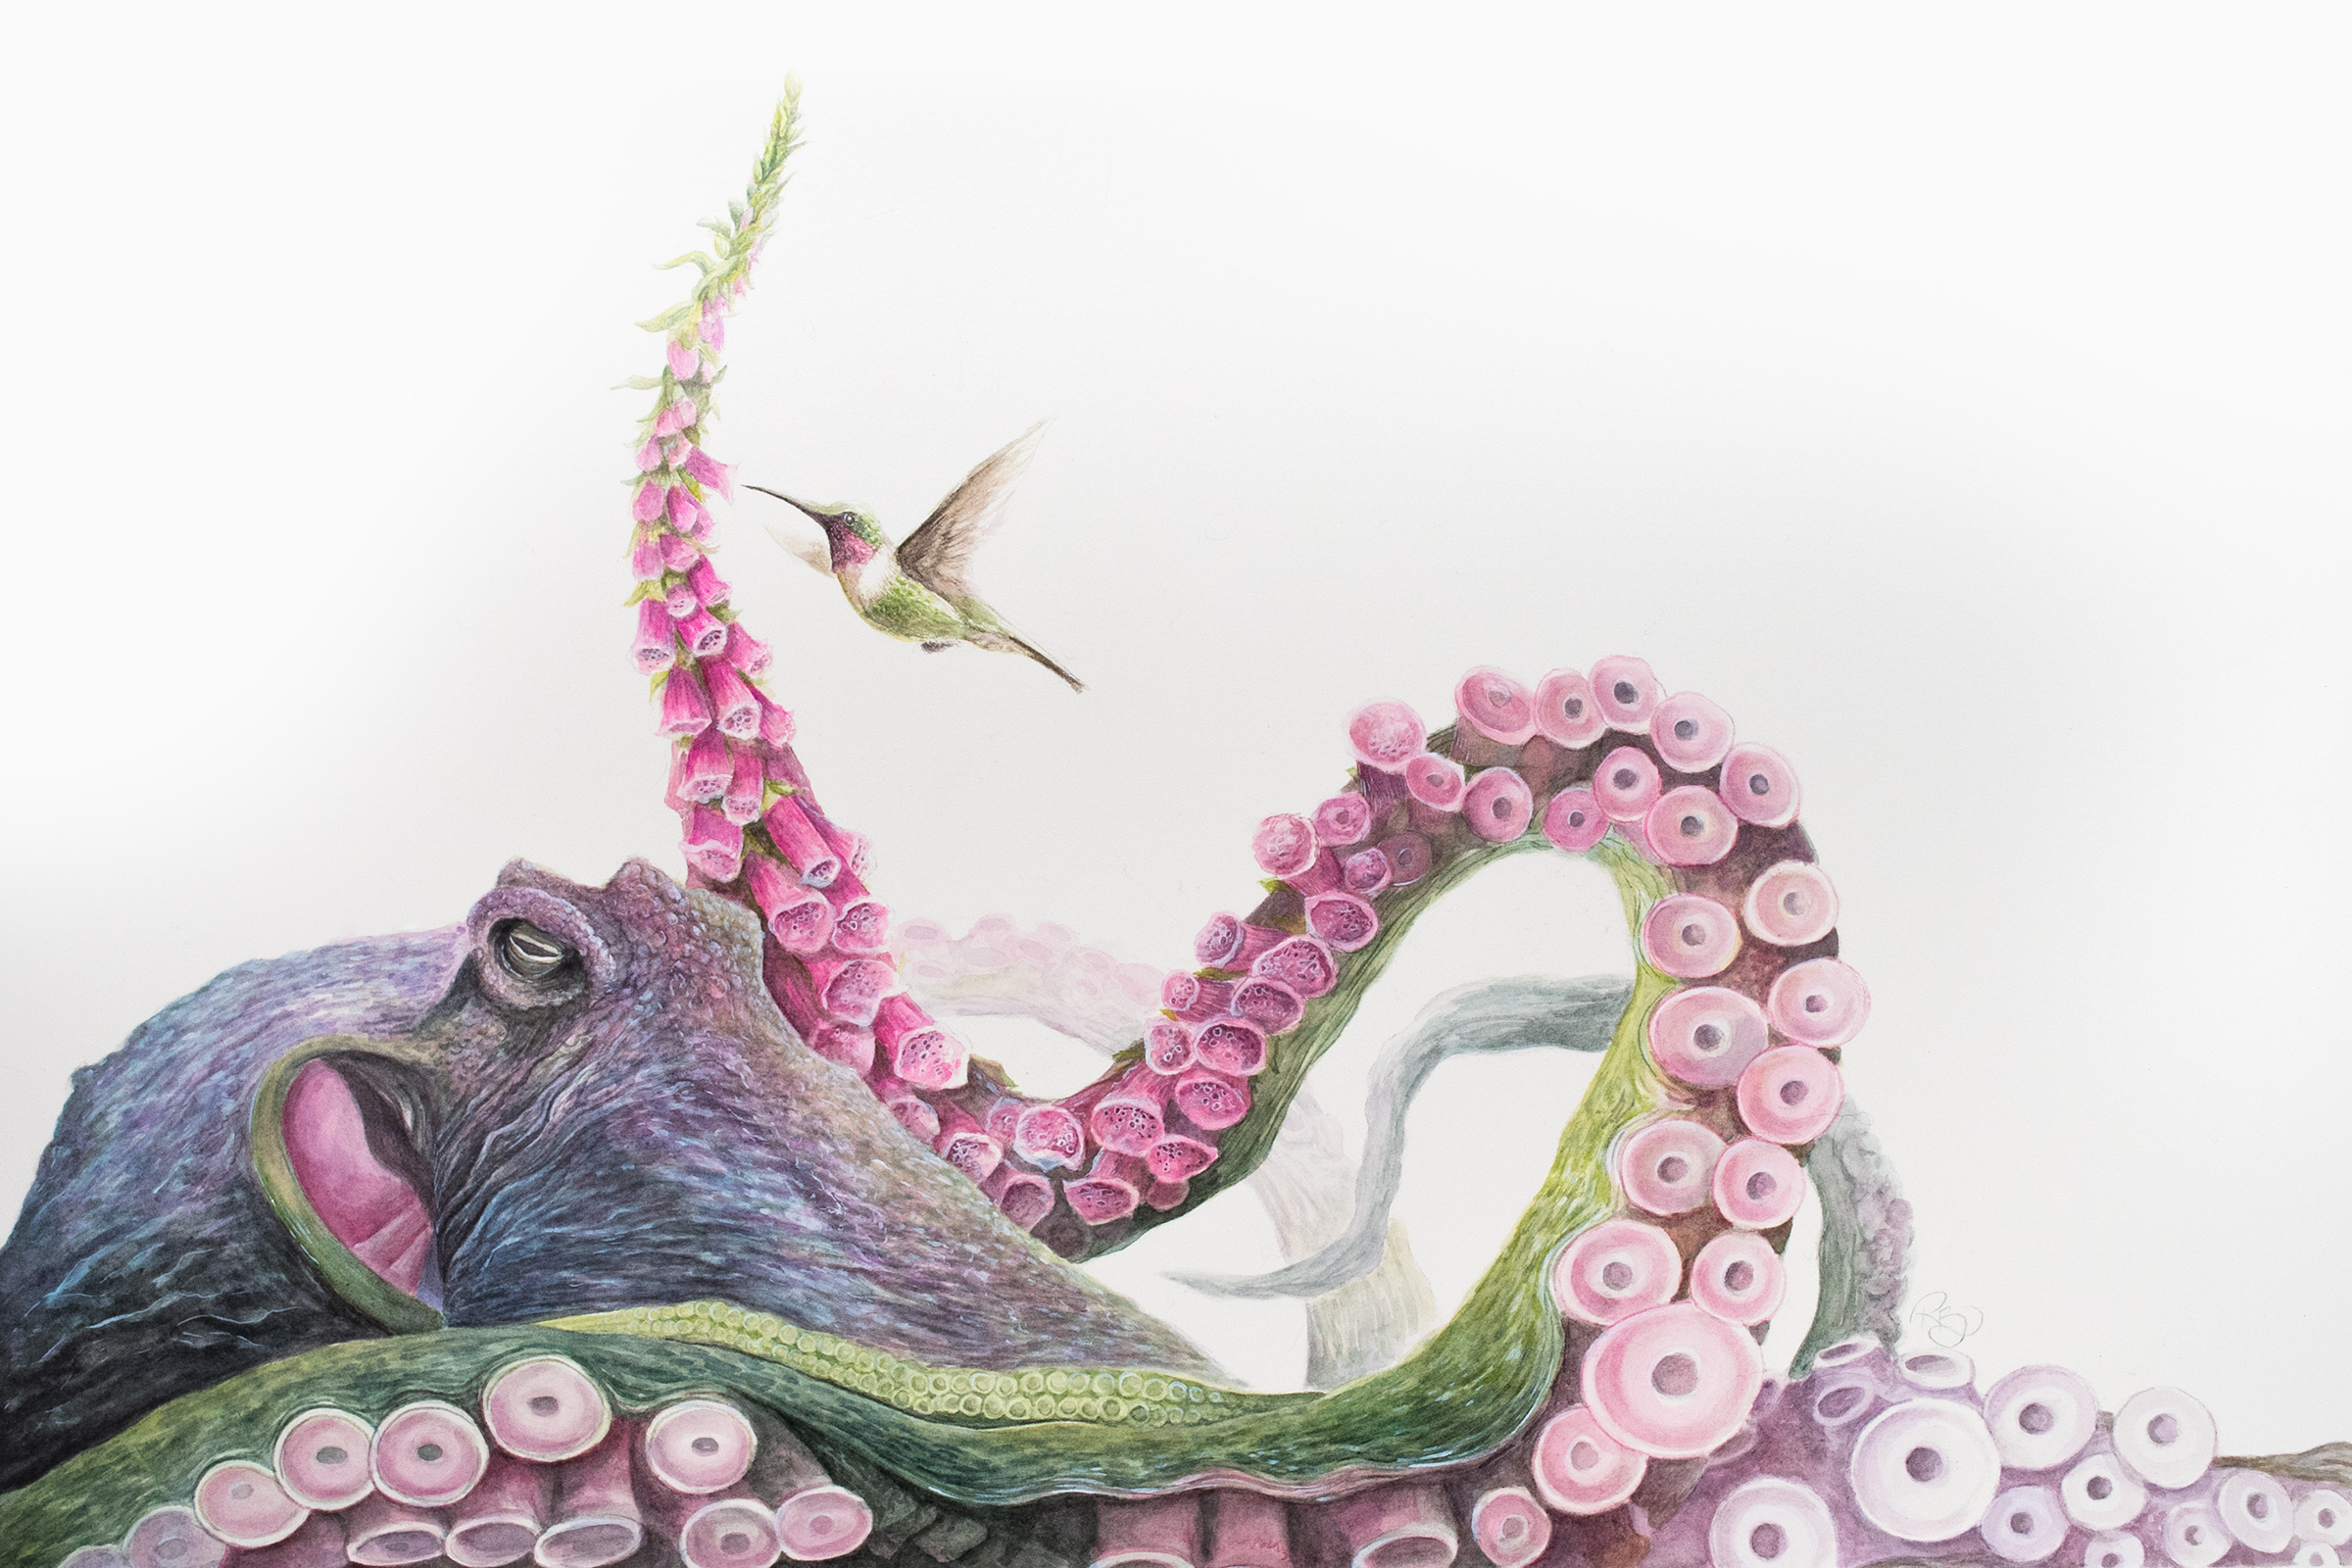 A purple pink and green octopus with one of its tentacles curving over onto itself changing into foxglove flowers A hummingbird hovers near the flower buds.